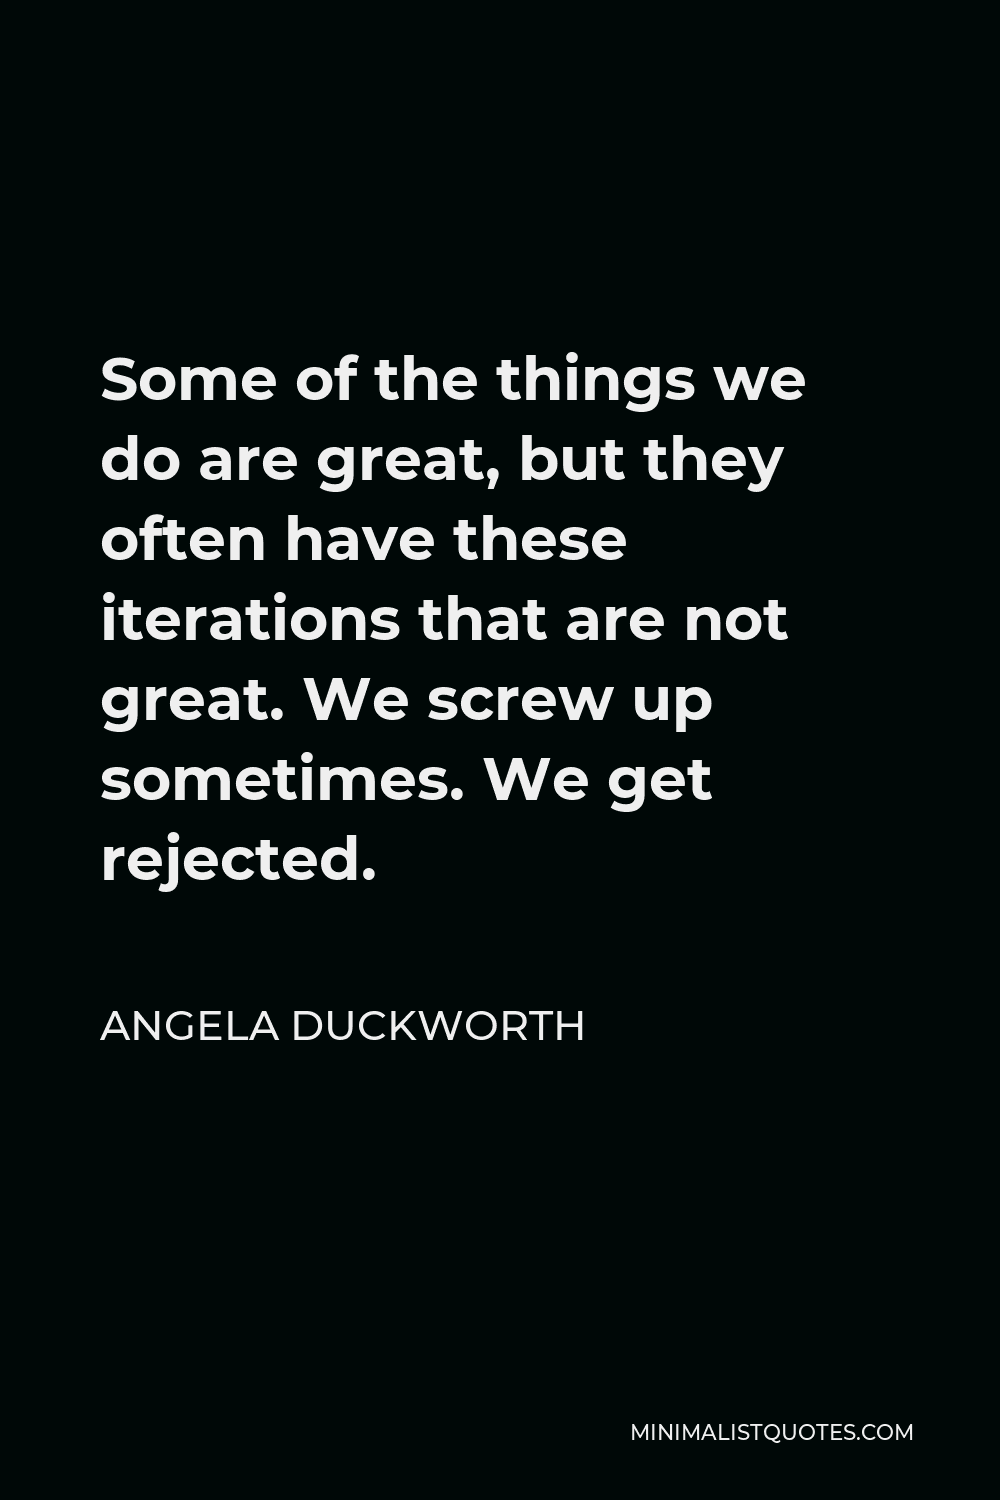 Angela Duckworth Quote - Some of the things we do are great, but they often have these iterations that are not great. We screw up sometimes. We get rejected.